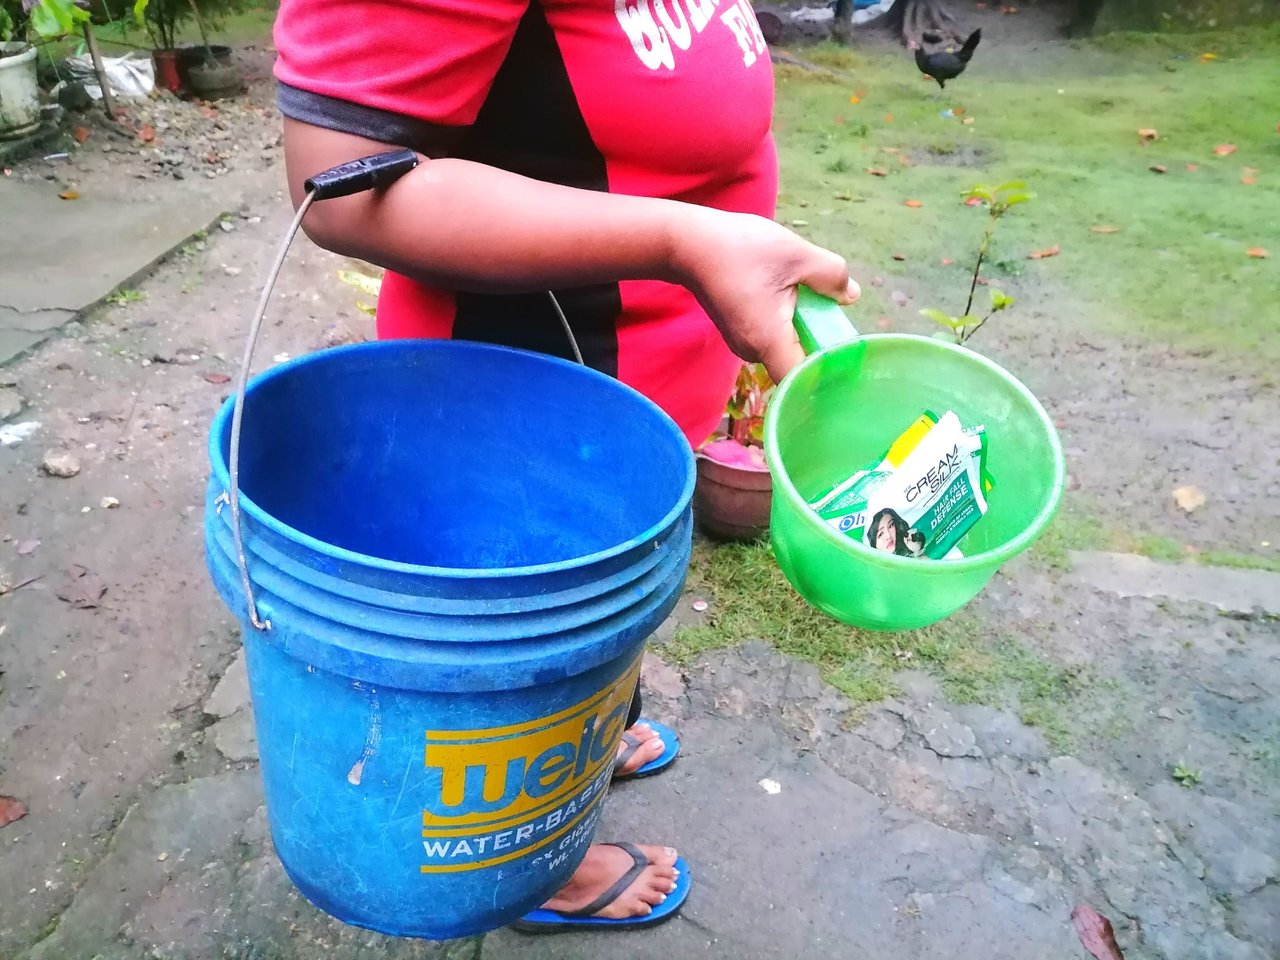 THE IMPORTANCE OF DIPPER OR TABO IN OUR COMMUNITY